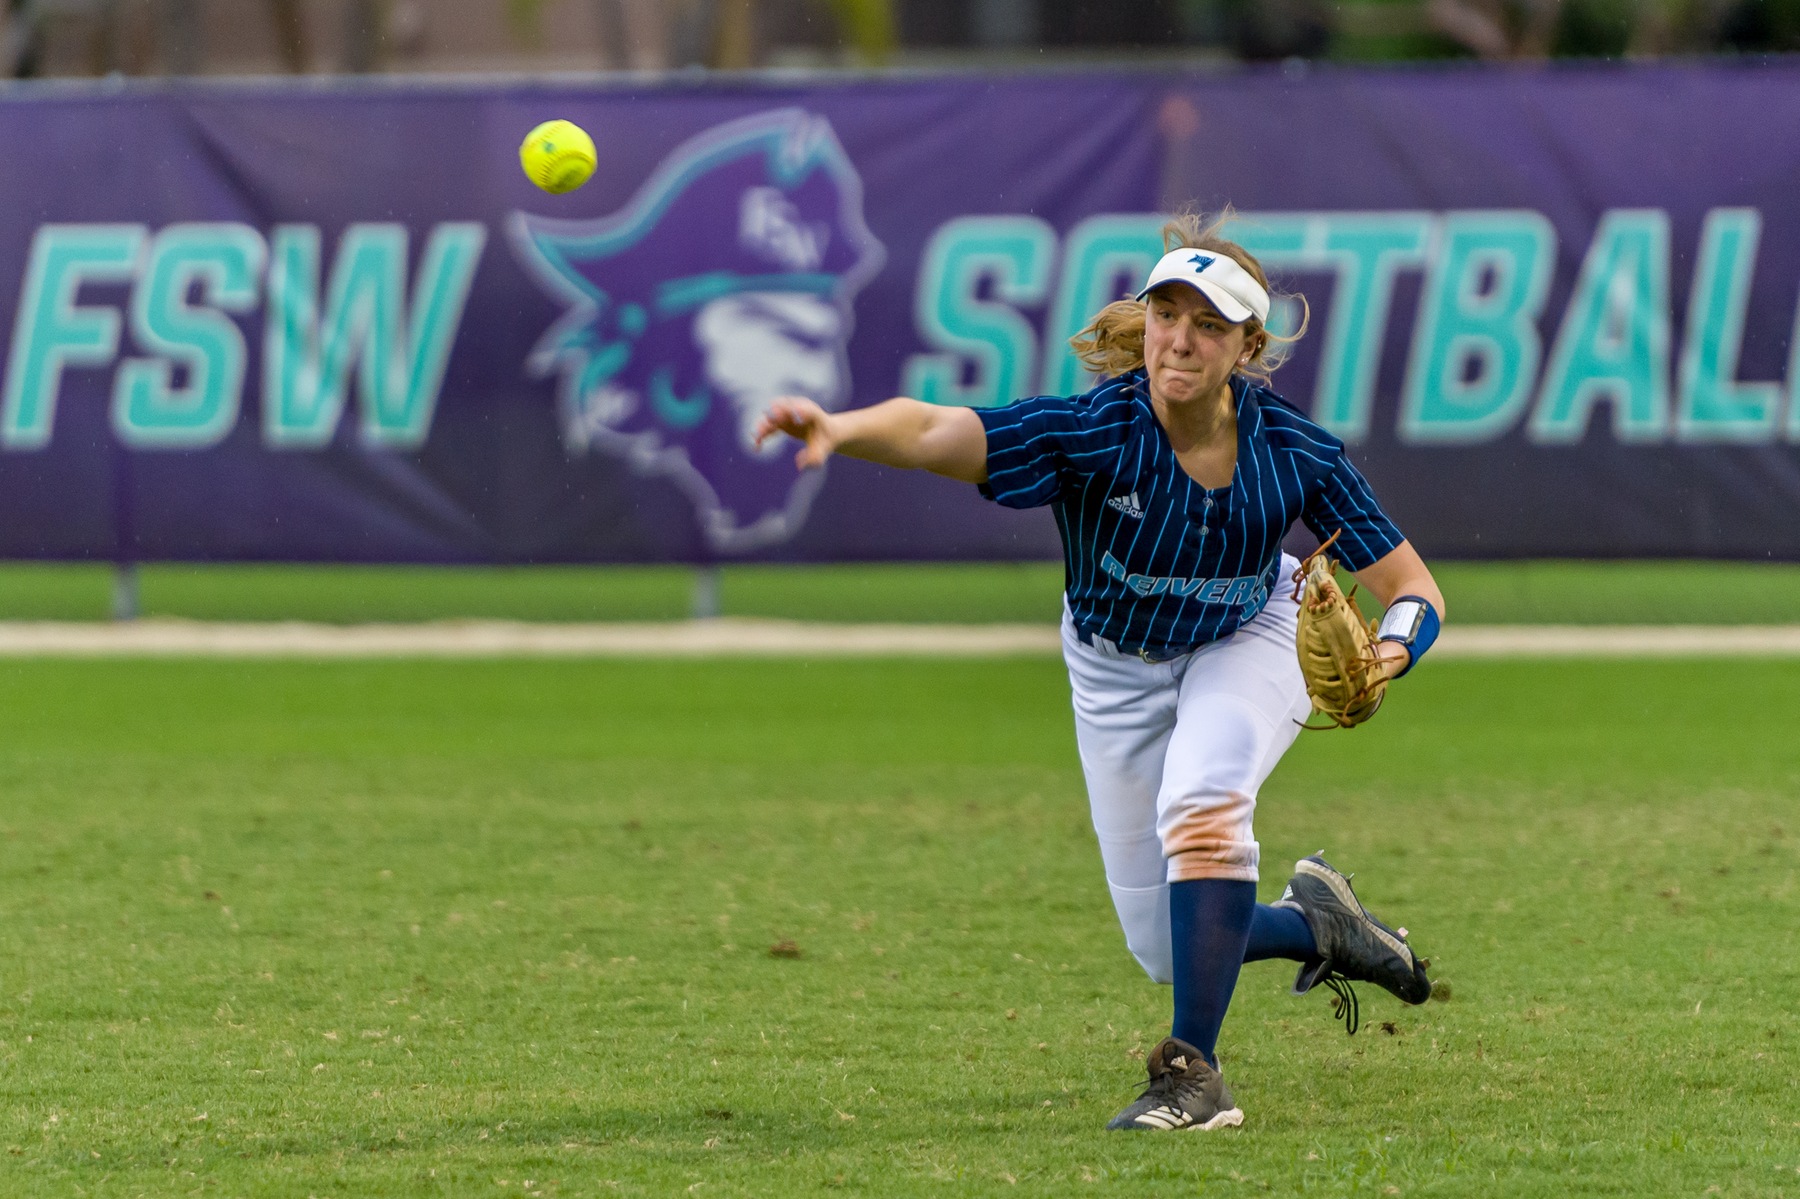 Emily Jacobs gets the ball back into the infield against #1 Florida Southwestern.

PHOTO COURTESY OF CAPTIVEPHOTONS.COM